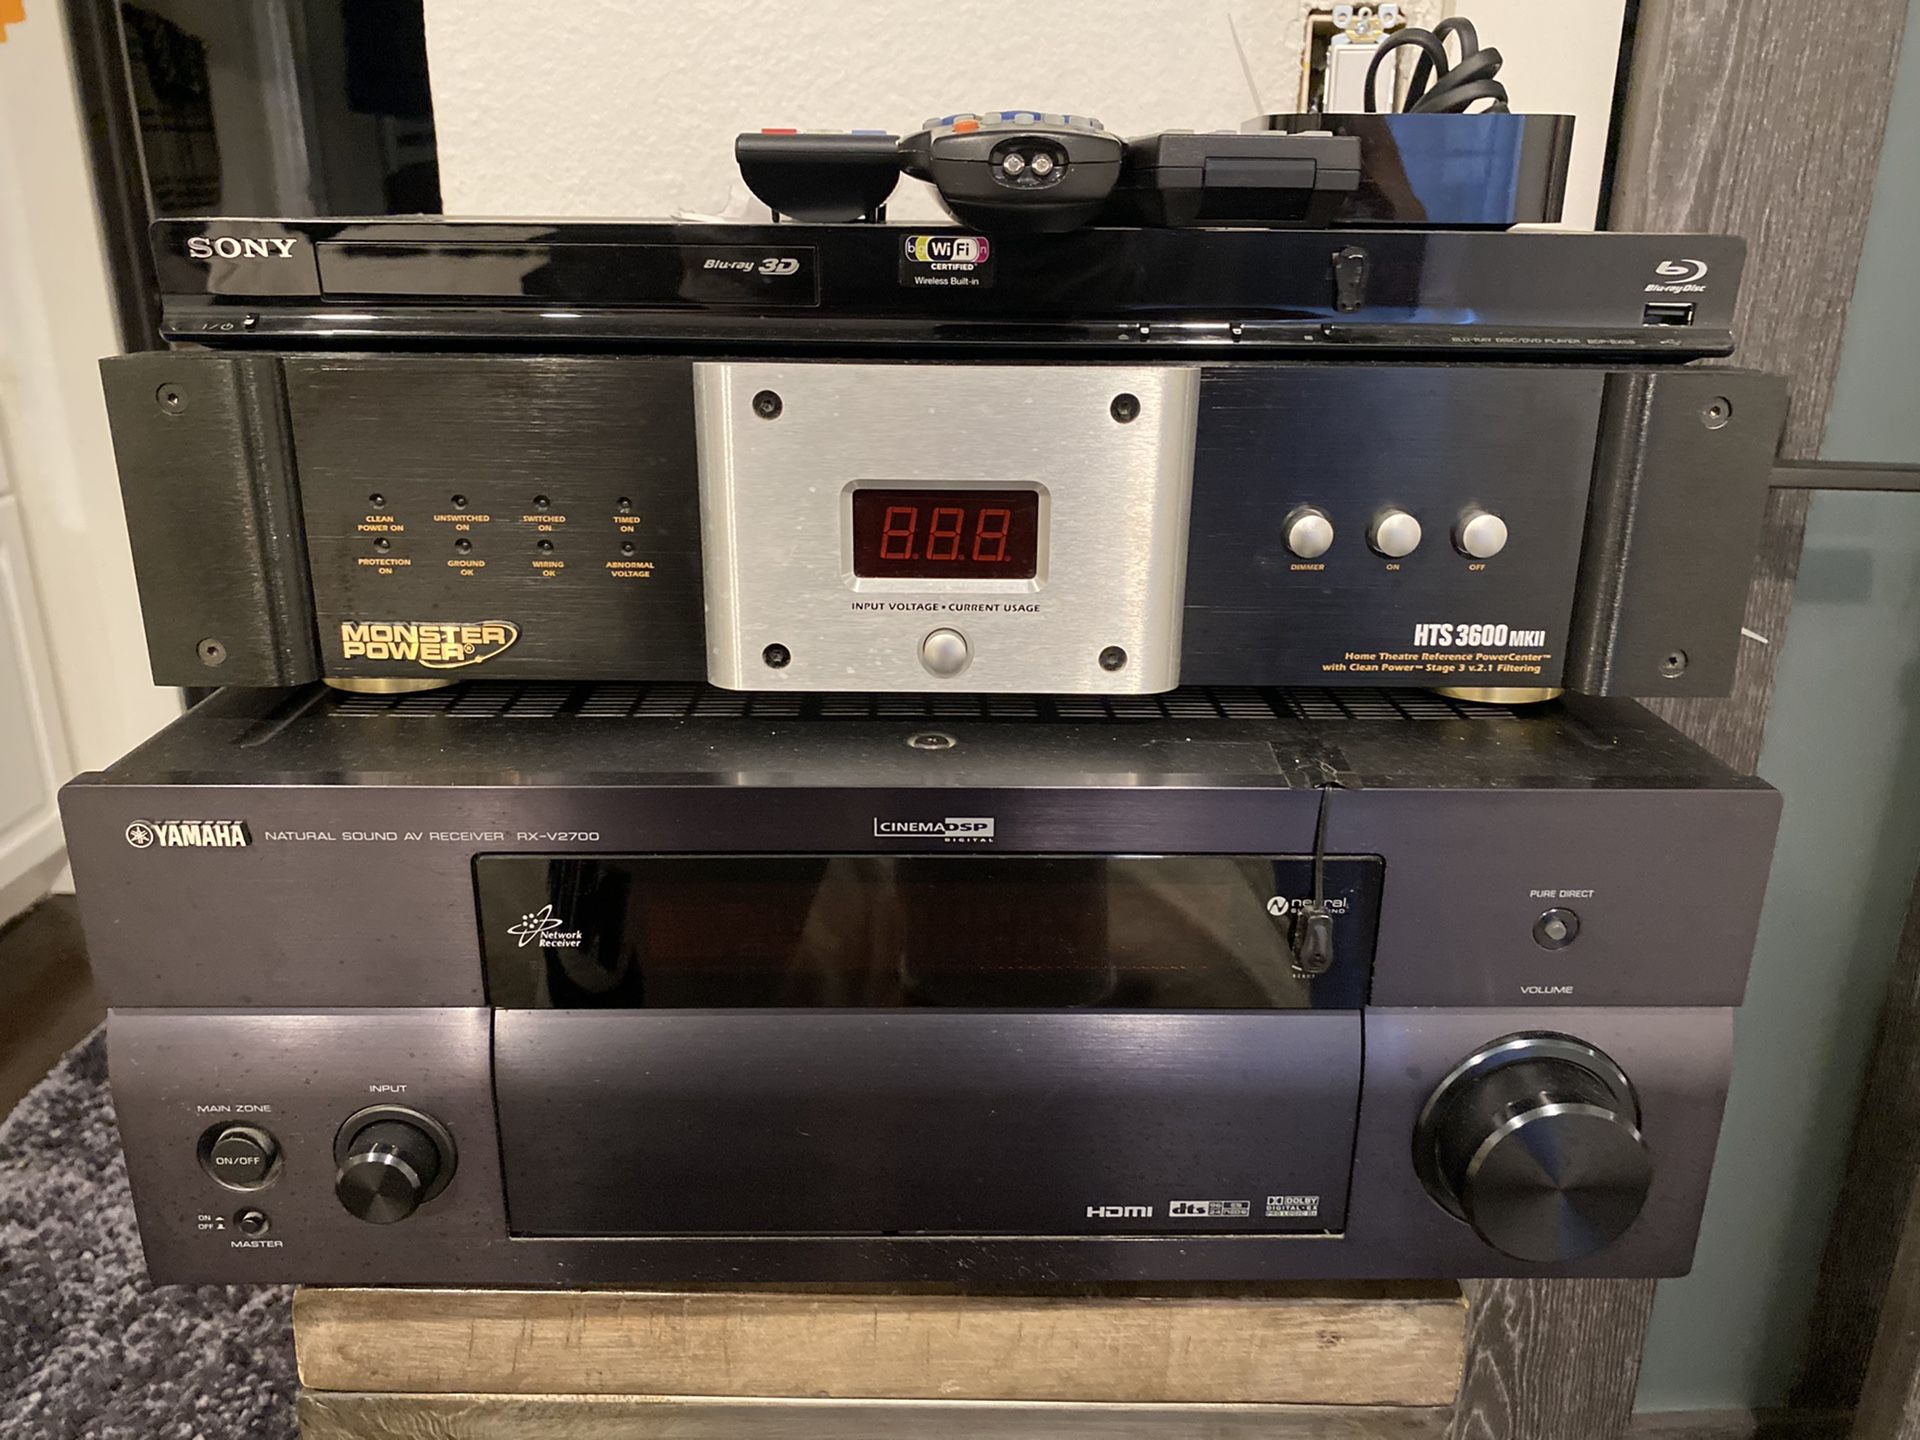 Yamaha 2700 receiver + Monster Amplifier + Sony Blue Ray